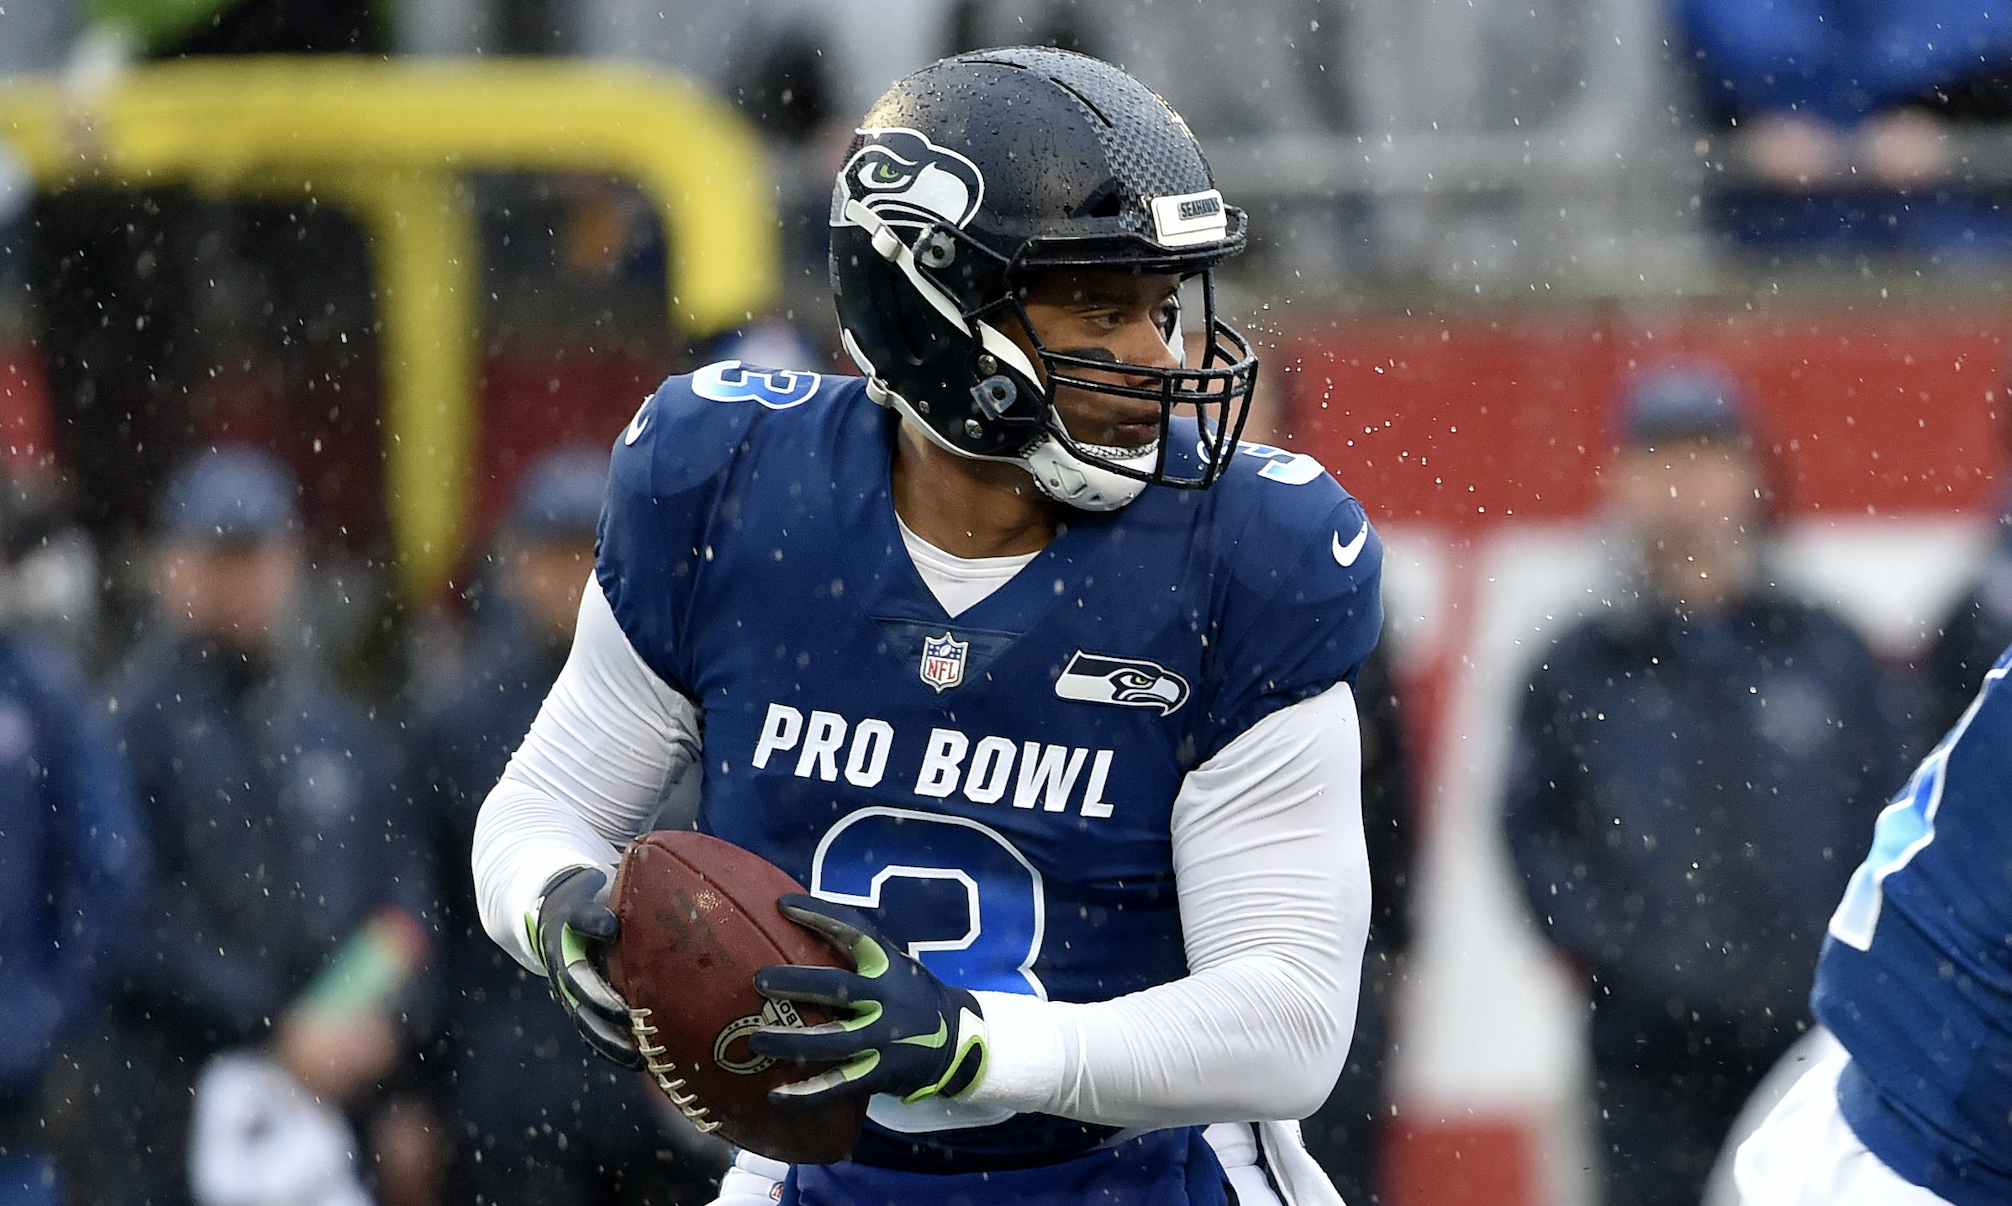 pro bowl russell wilson